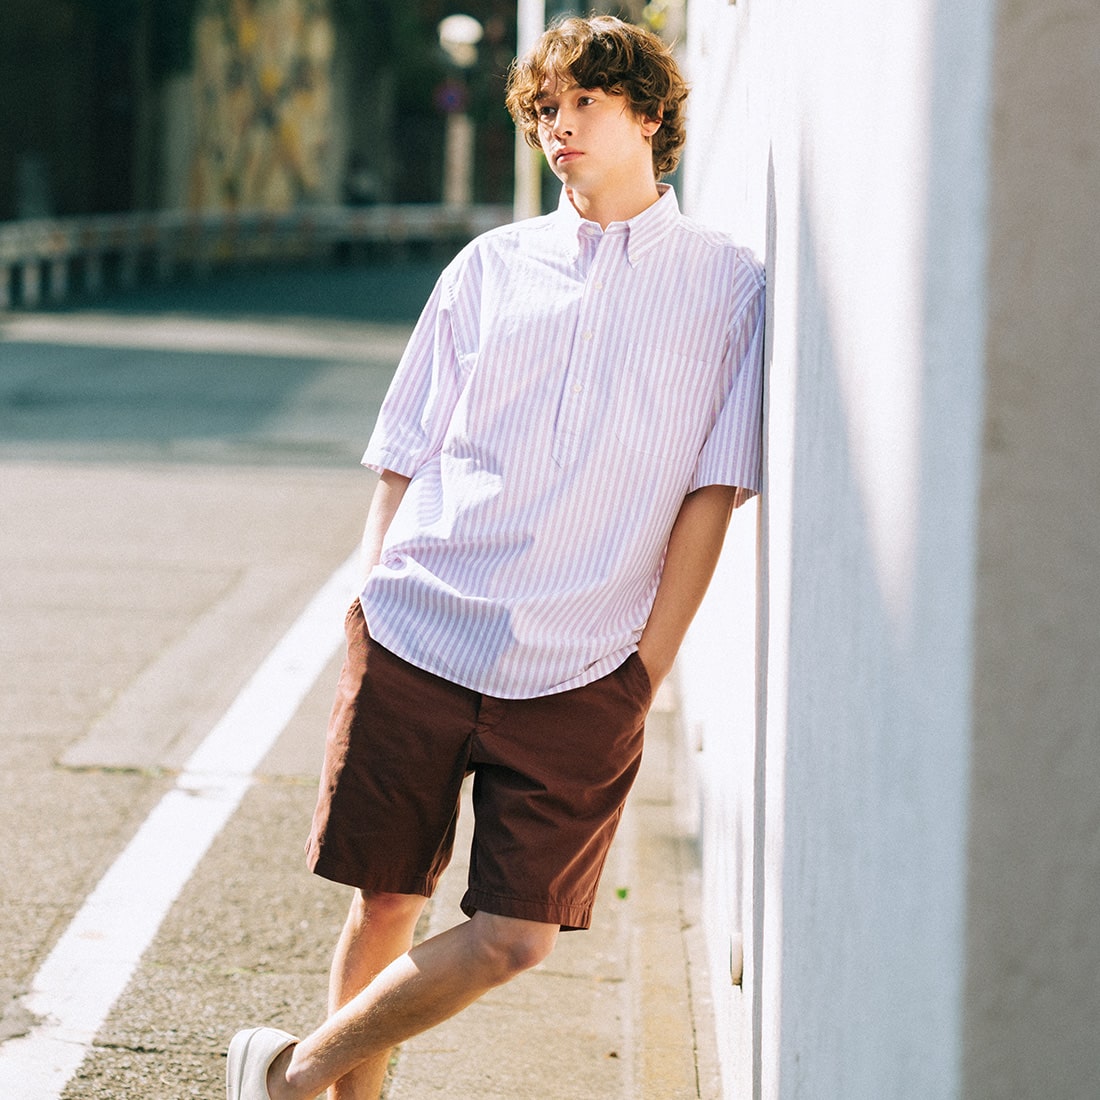 Uniqlo men's shorts, in today's fashion world, shorts have become one of the must-have items for men in summer.